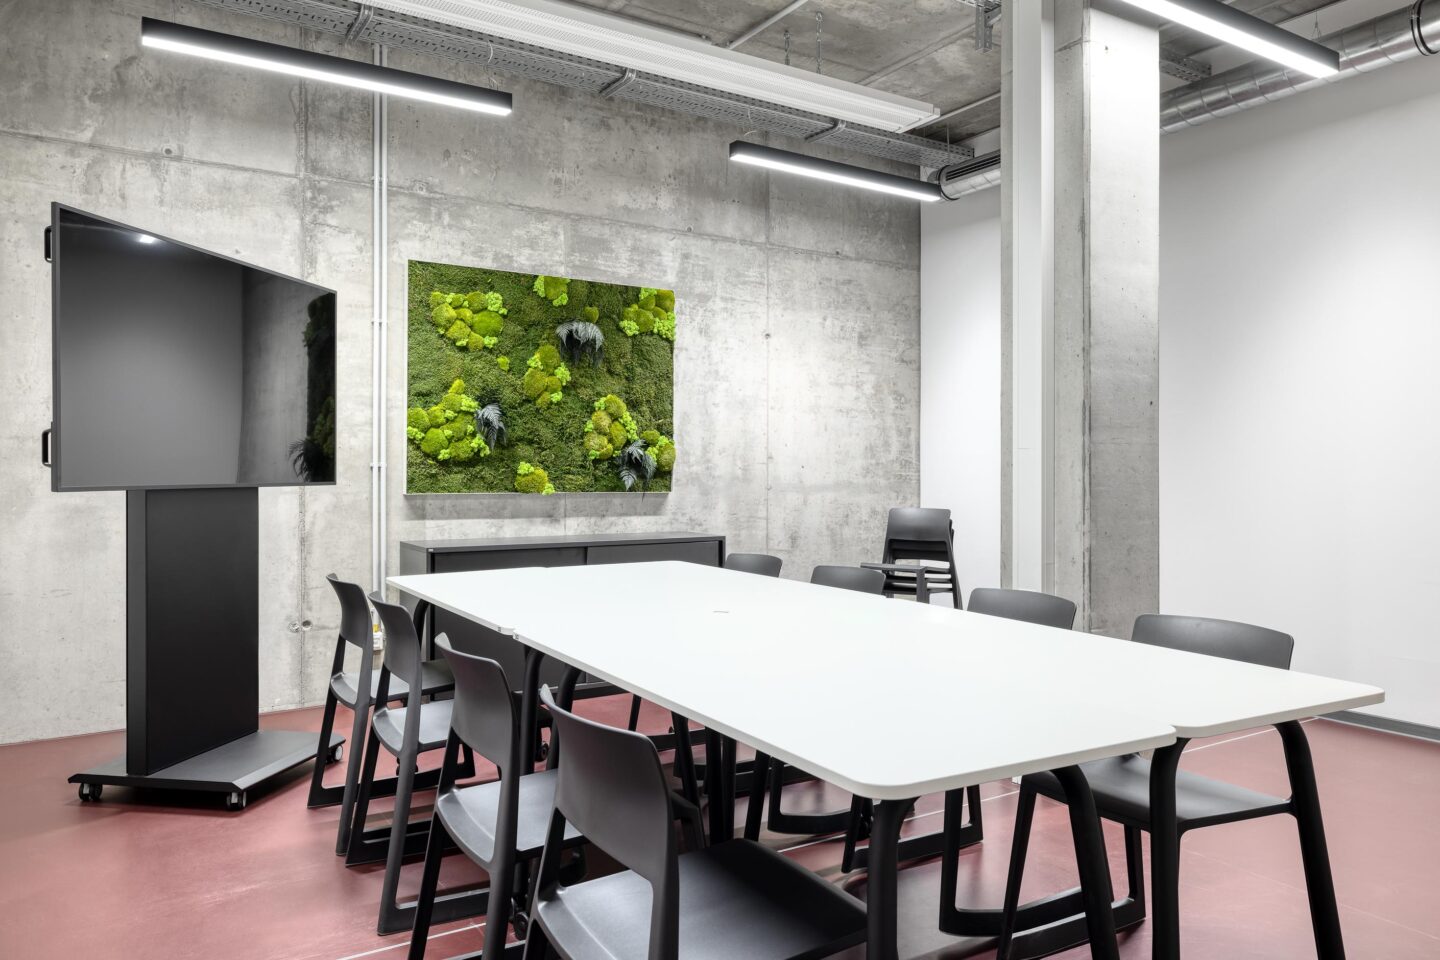 media technology │ Accessoires for meeting areas │ modern work spaces at CyberLab with feco